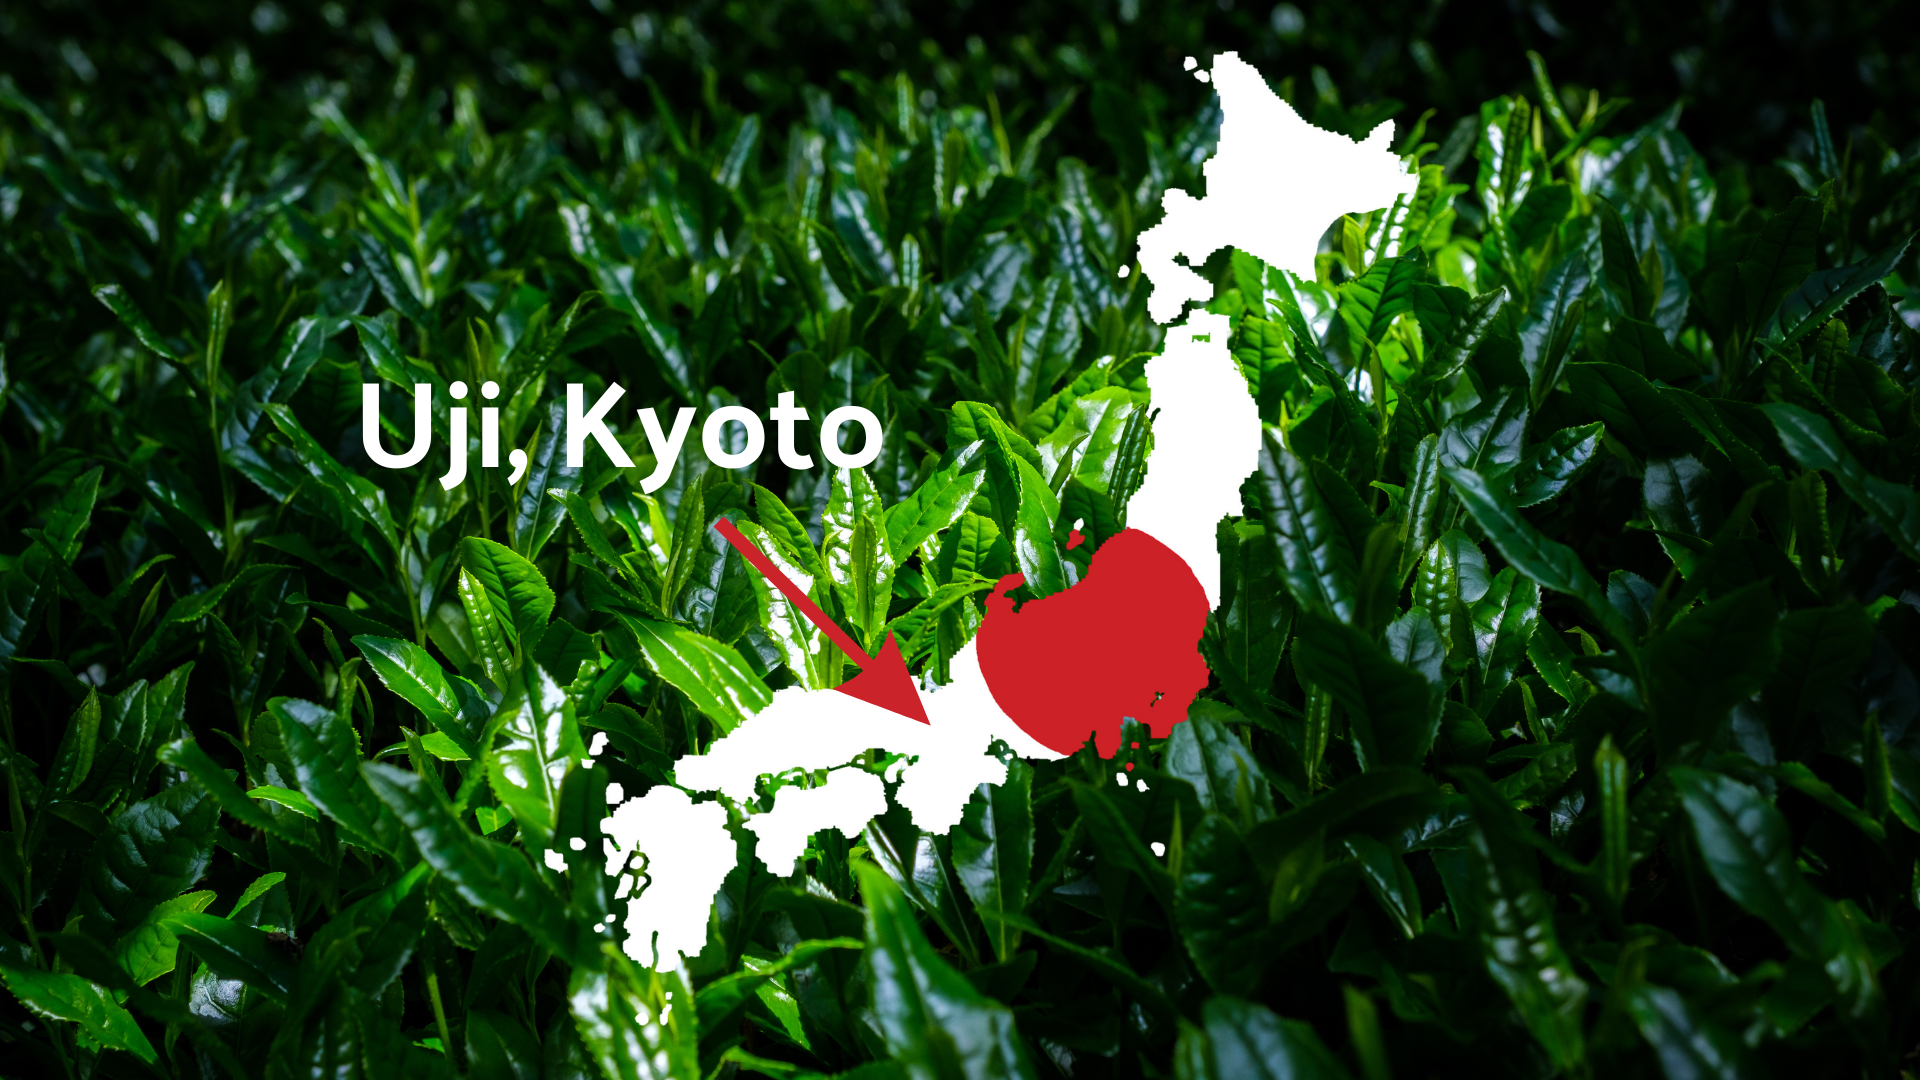 Shaded green tea plants with a map of Japan and an arrow to Uji, Kyoto